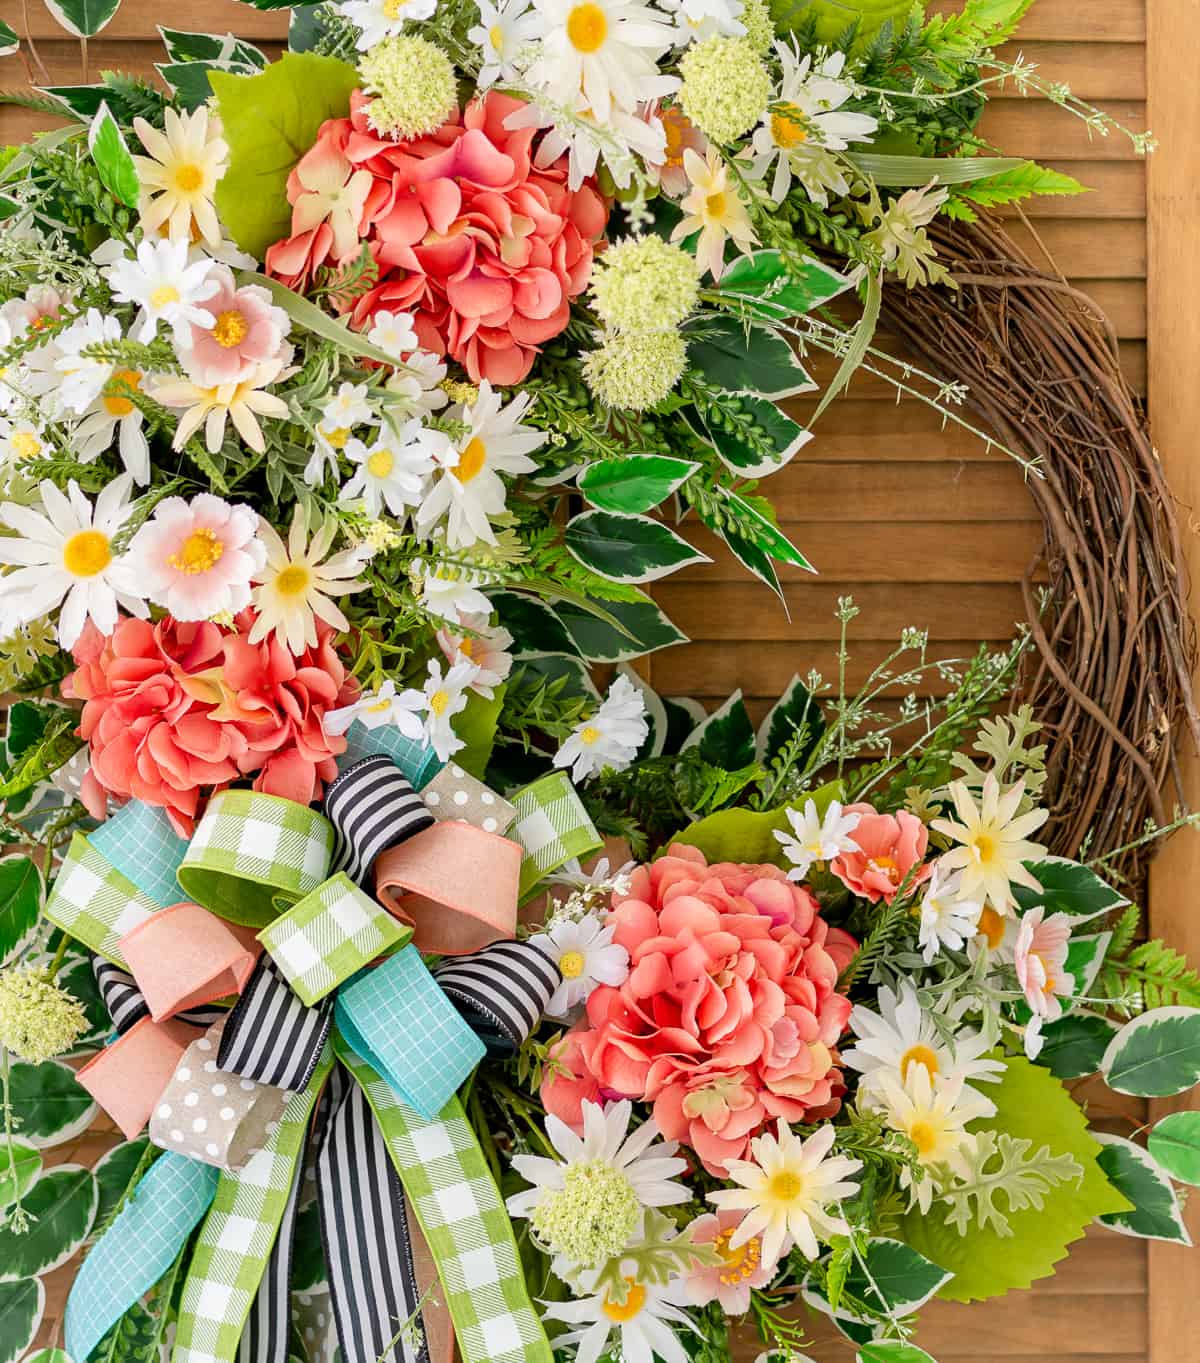 assortment of brightly colored flowers and ribbon on a grapevine wreath for spring